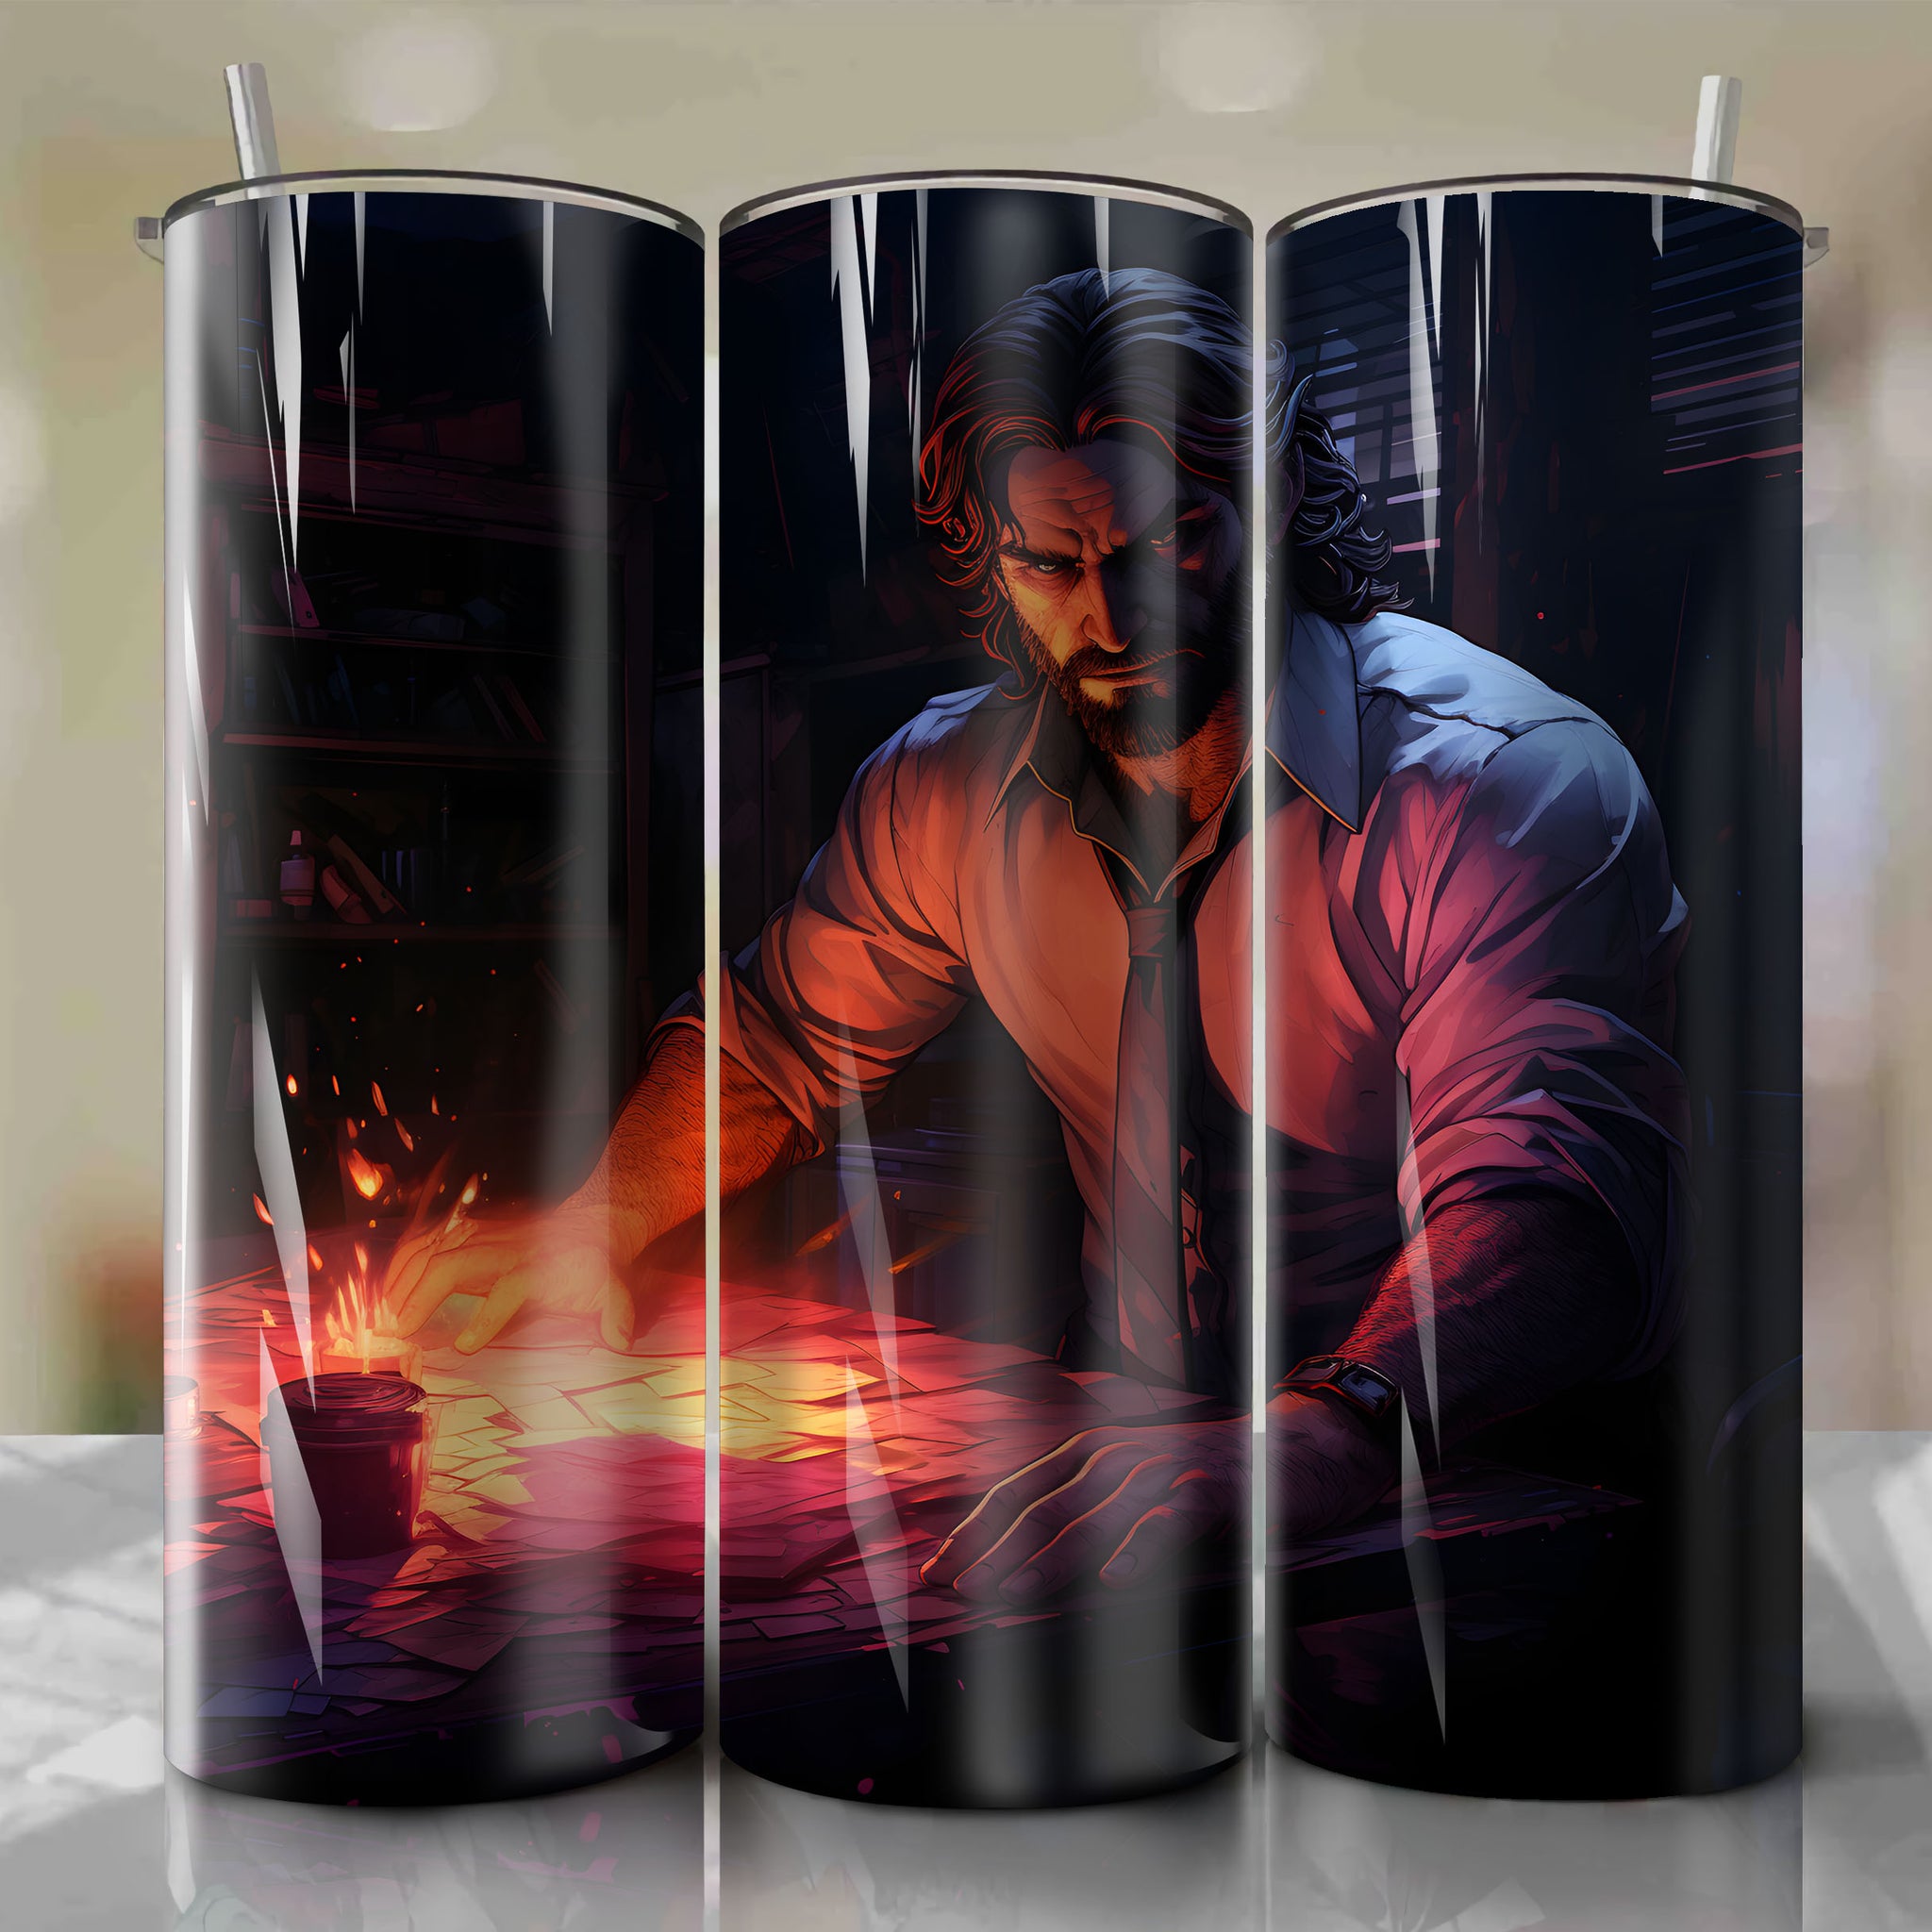 20 Oz Tumbler Wrap - A Stylish and Functional Accessory for On-the-Go Beverage Enjoyment
